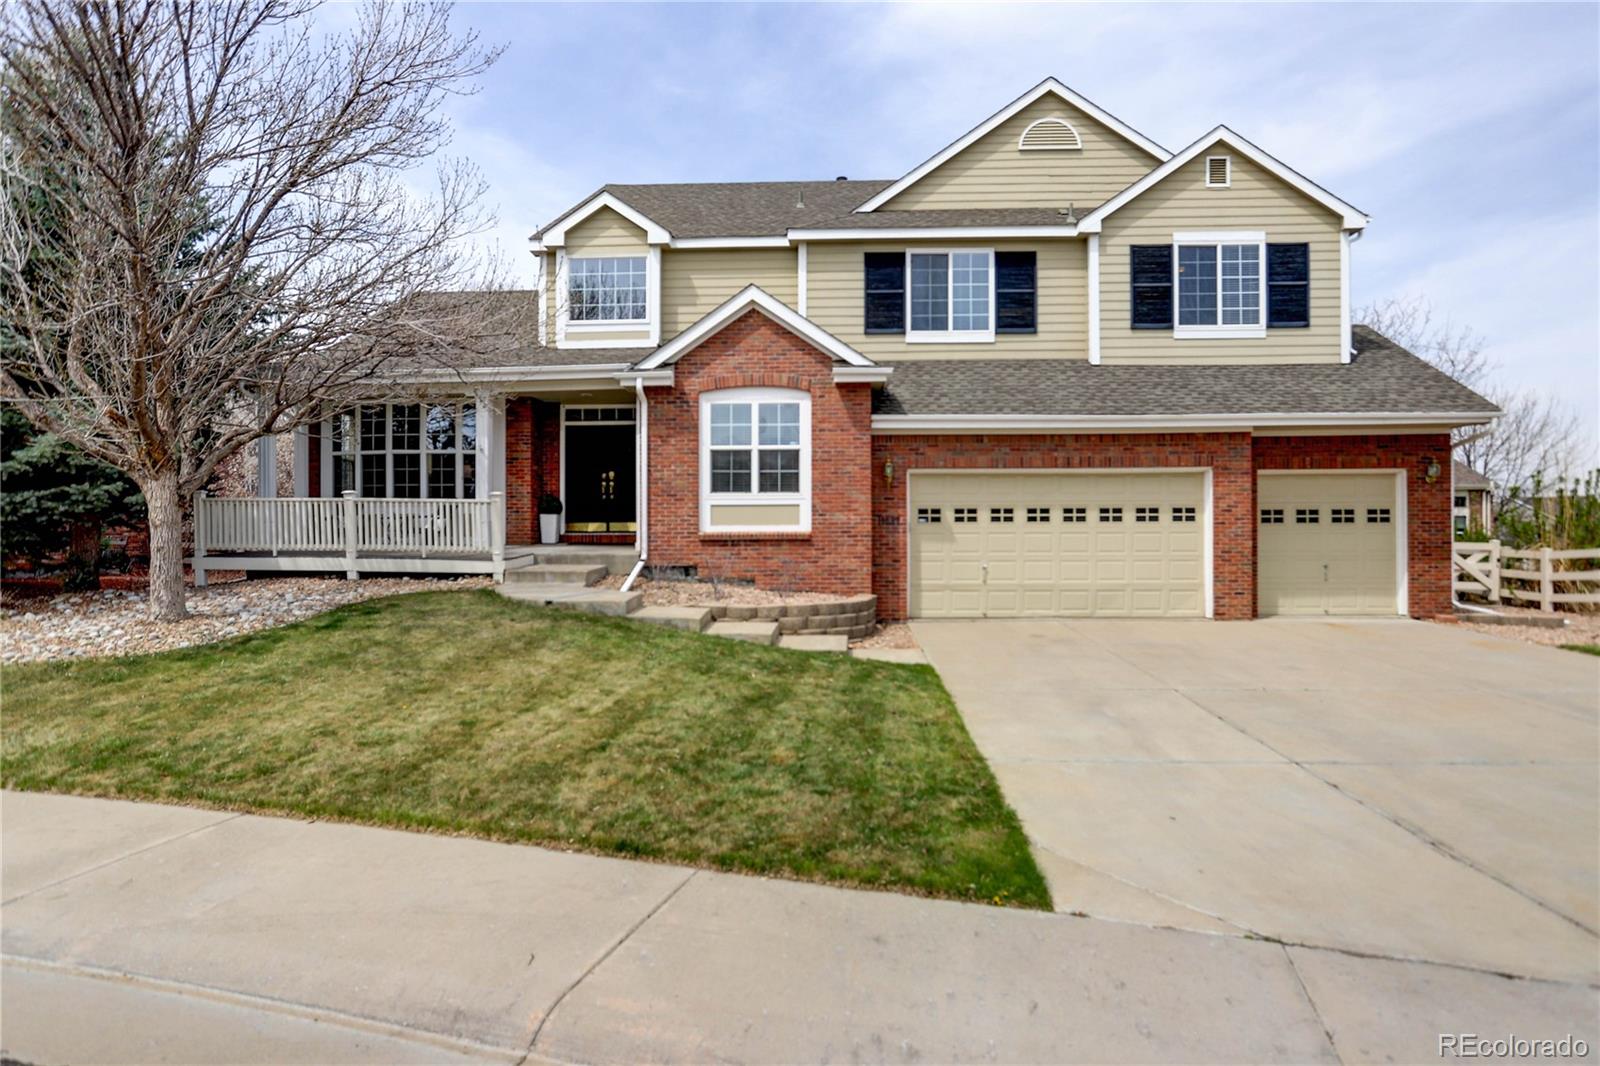 11087 Clay Drive, Westminster, CO 80234 - MLS#: 2280342